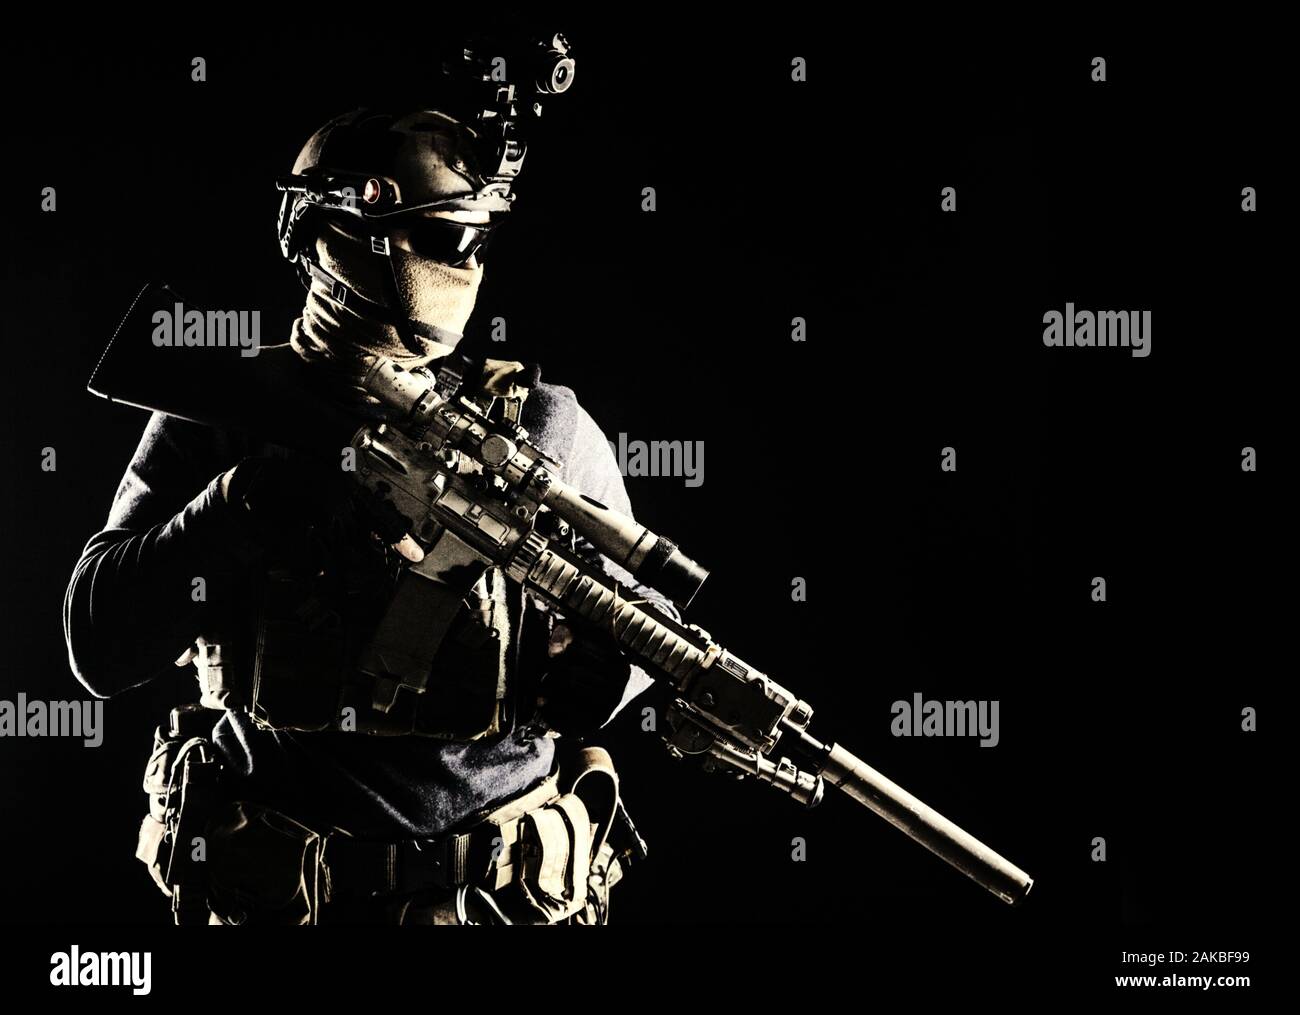 Army marksman with sniper rifle in darkness Stock Photo